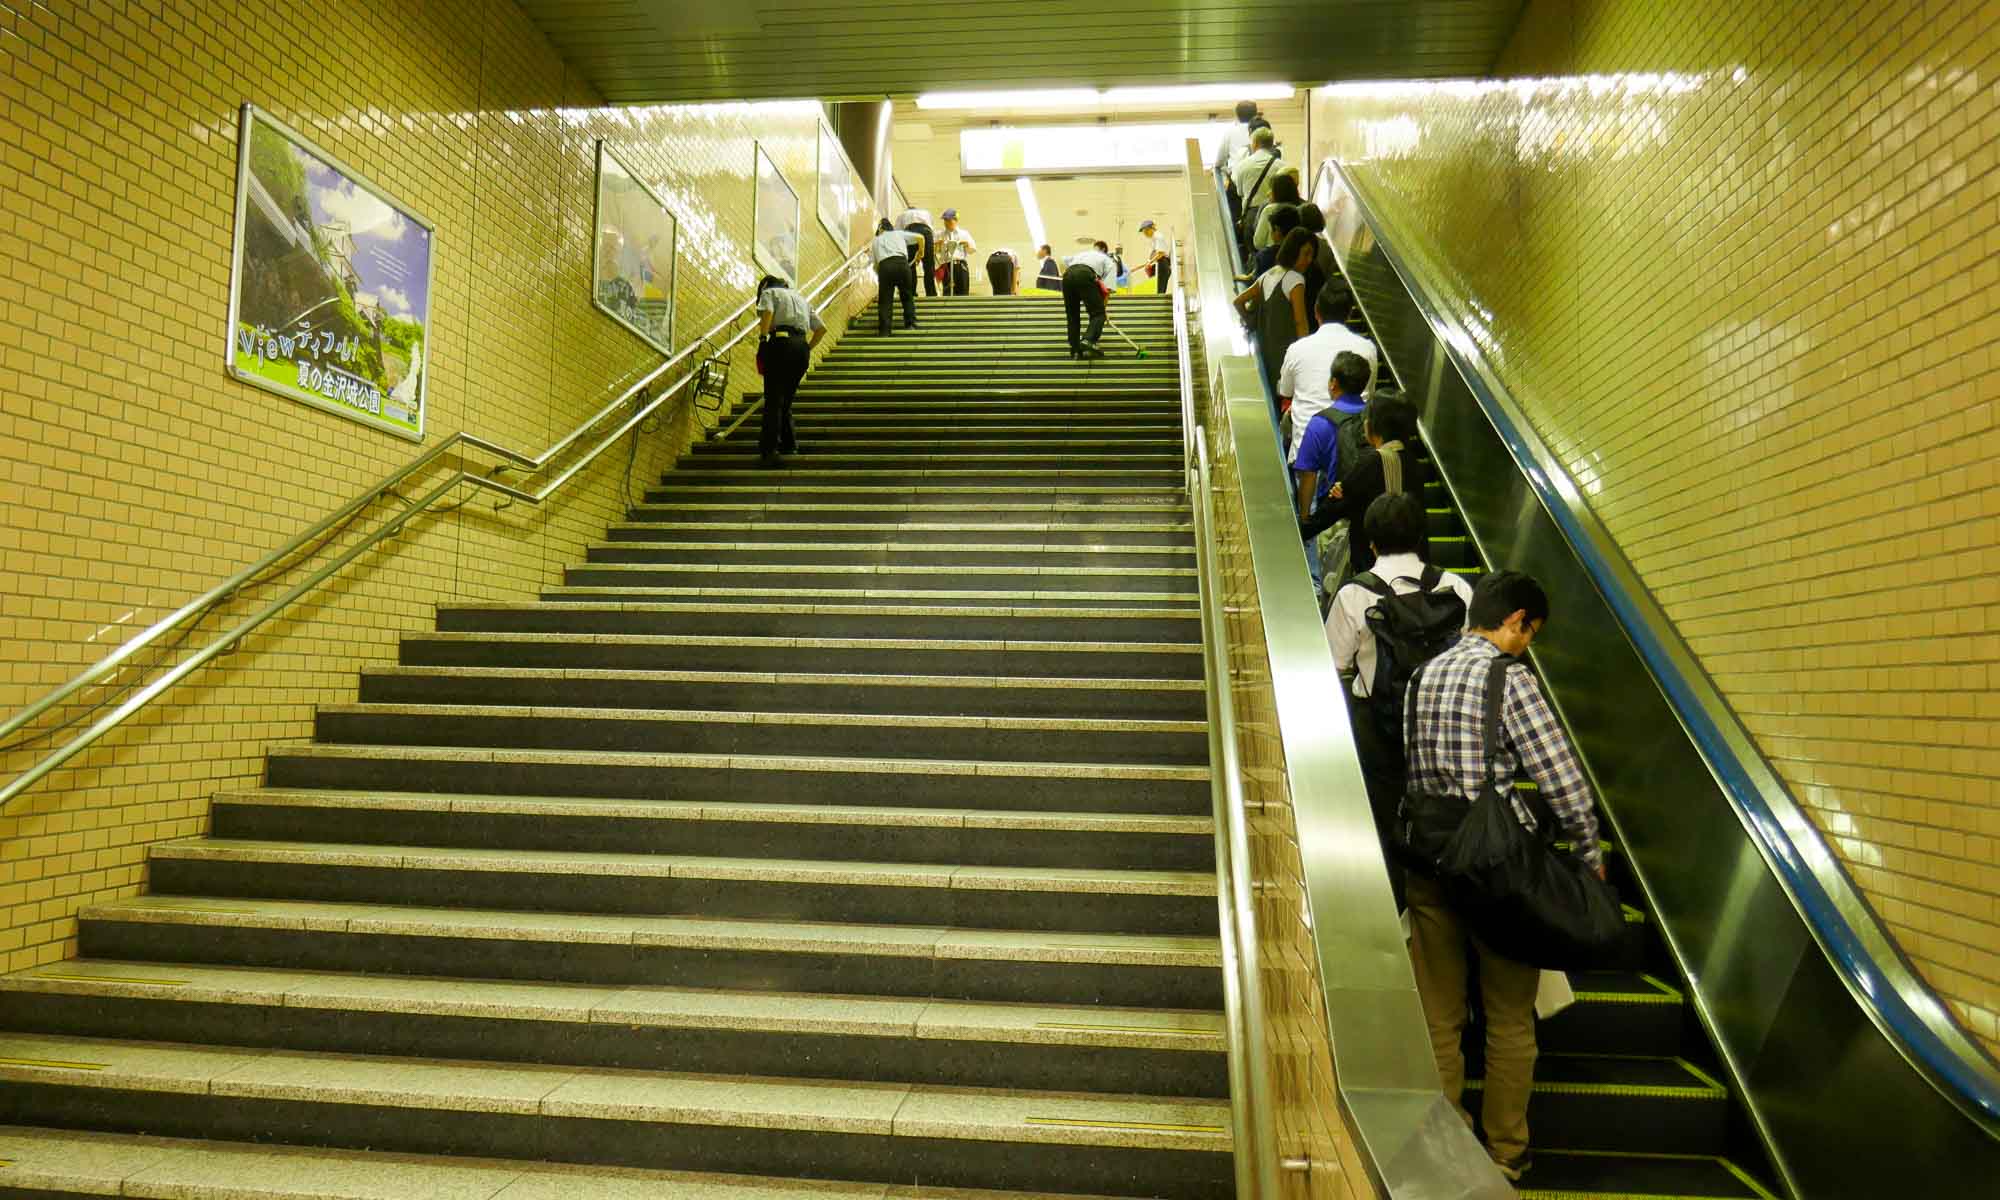 Cleaners cleaning the stairs and banisters in the Tokyo metro